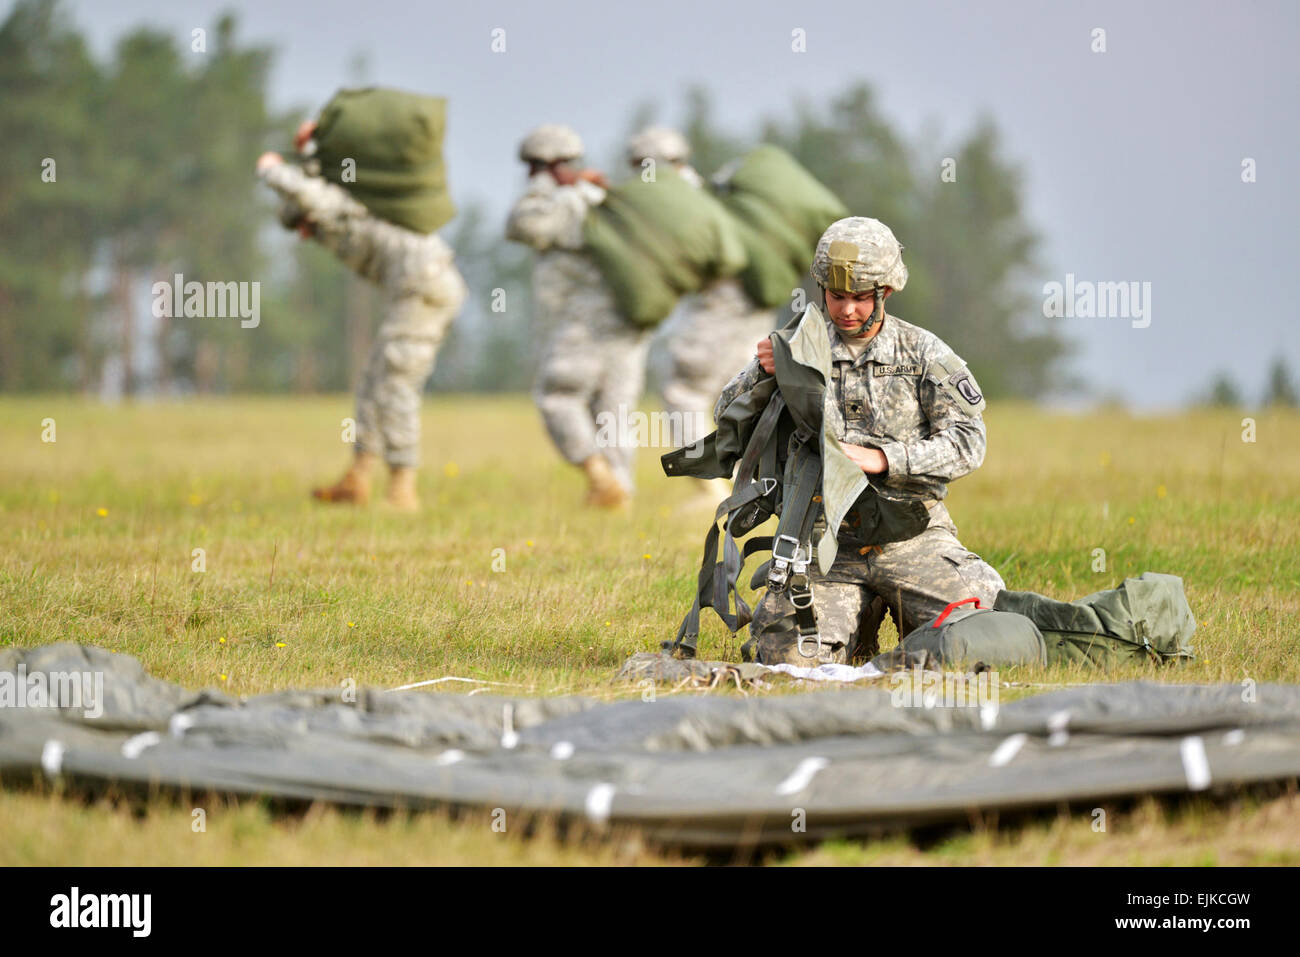 U.S. paratroopers, assigned to 91st Cavalry Regiment, 173rd Airborne Brigade, recover their T-11 advanced tactical parachute systems after landing. The Soldiers participated in the airborne exercise with the German 313th Airborne Battalion and 43rd Czech Airborne Battalion at the 7th Army Joint Multinational Training Command's Grafenwoehr Training Area, Germany, Oct. 1, 2014.   Spc. Gertrud Zach Stock Photo